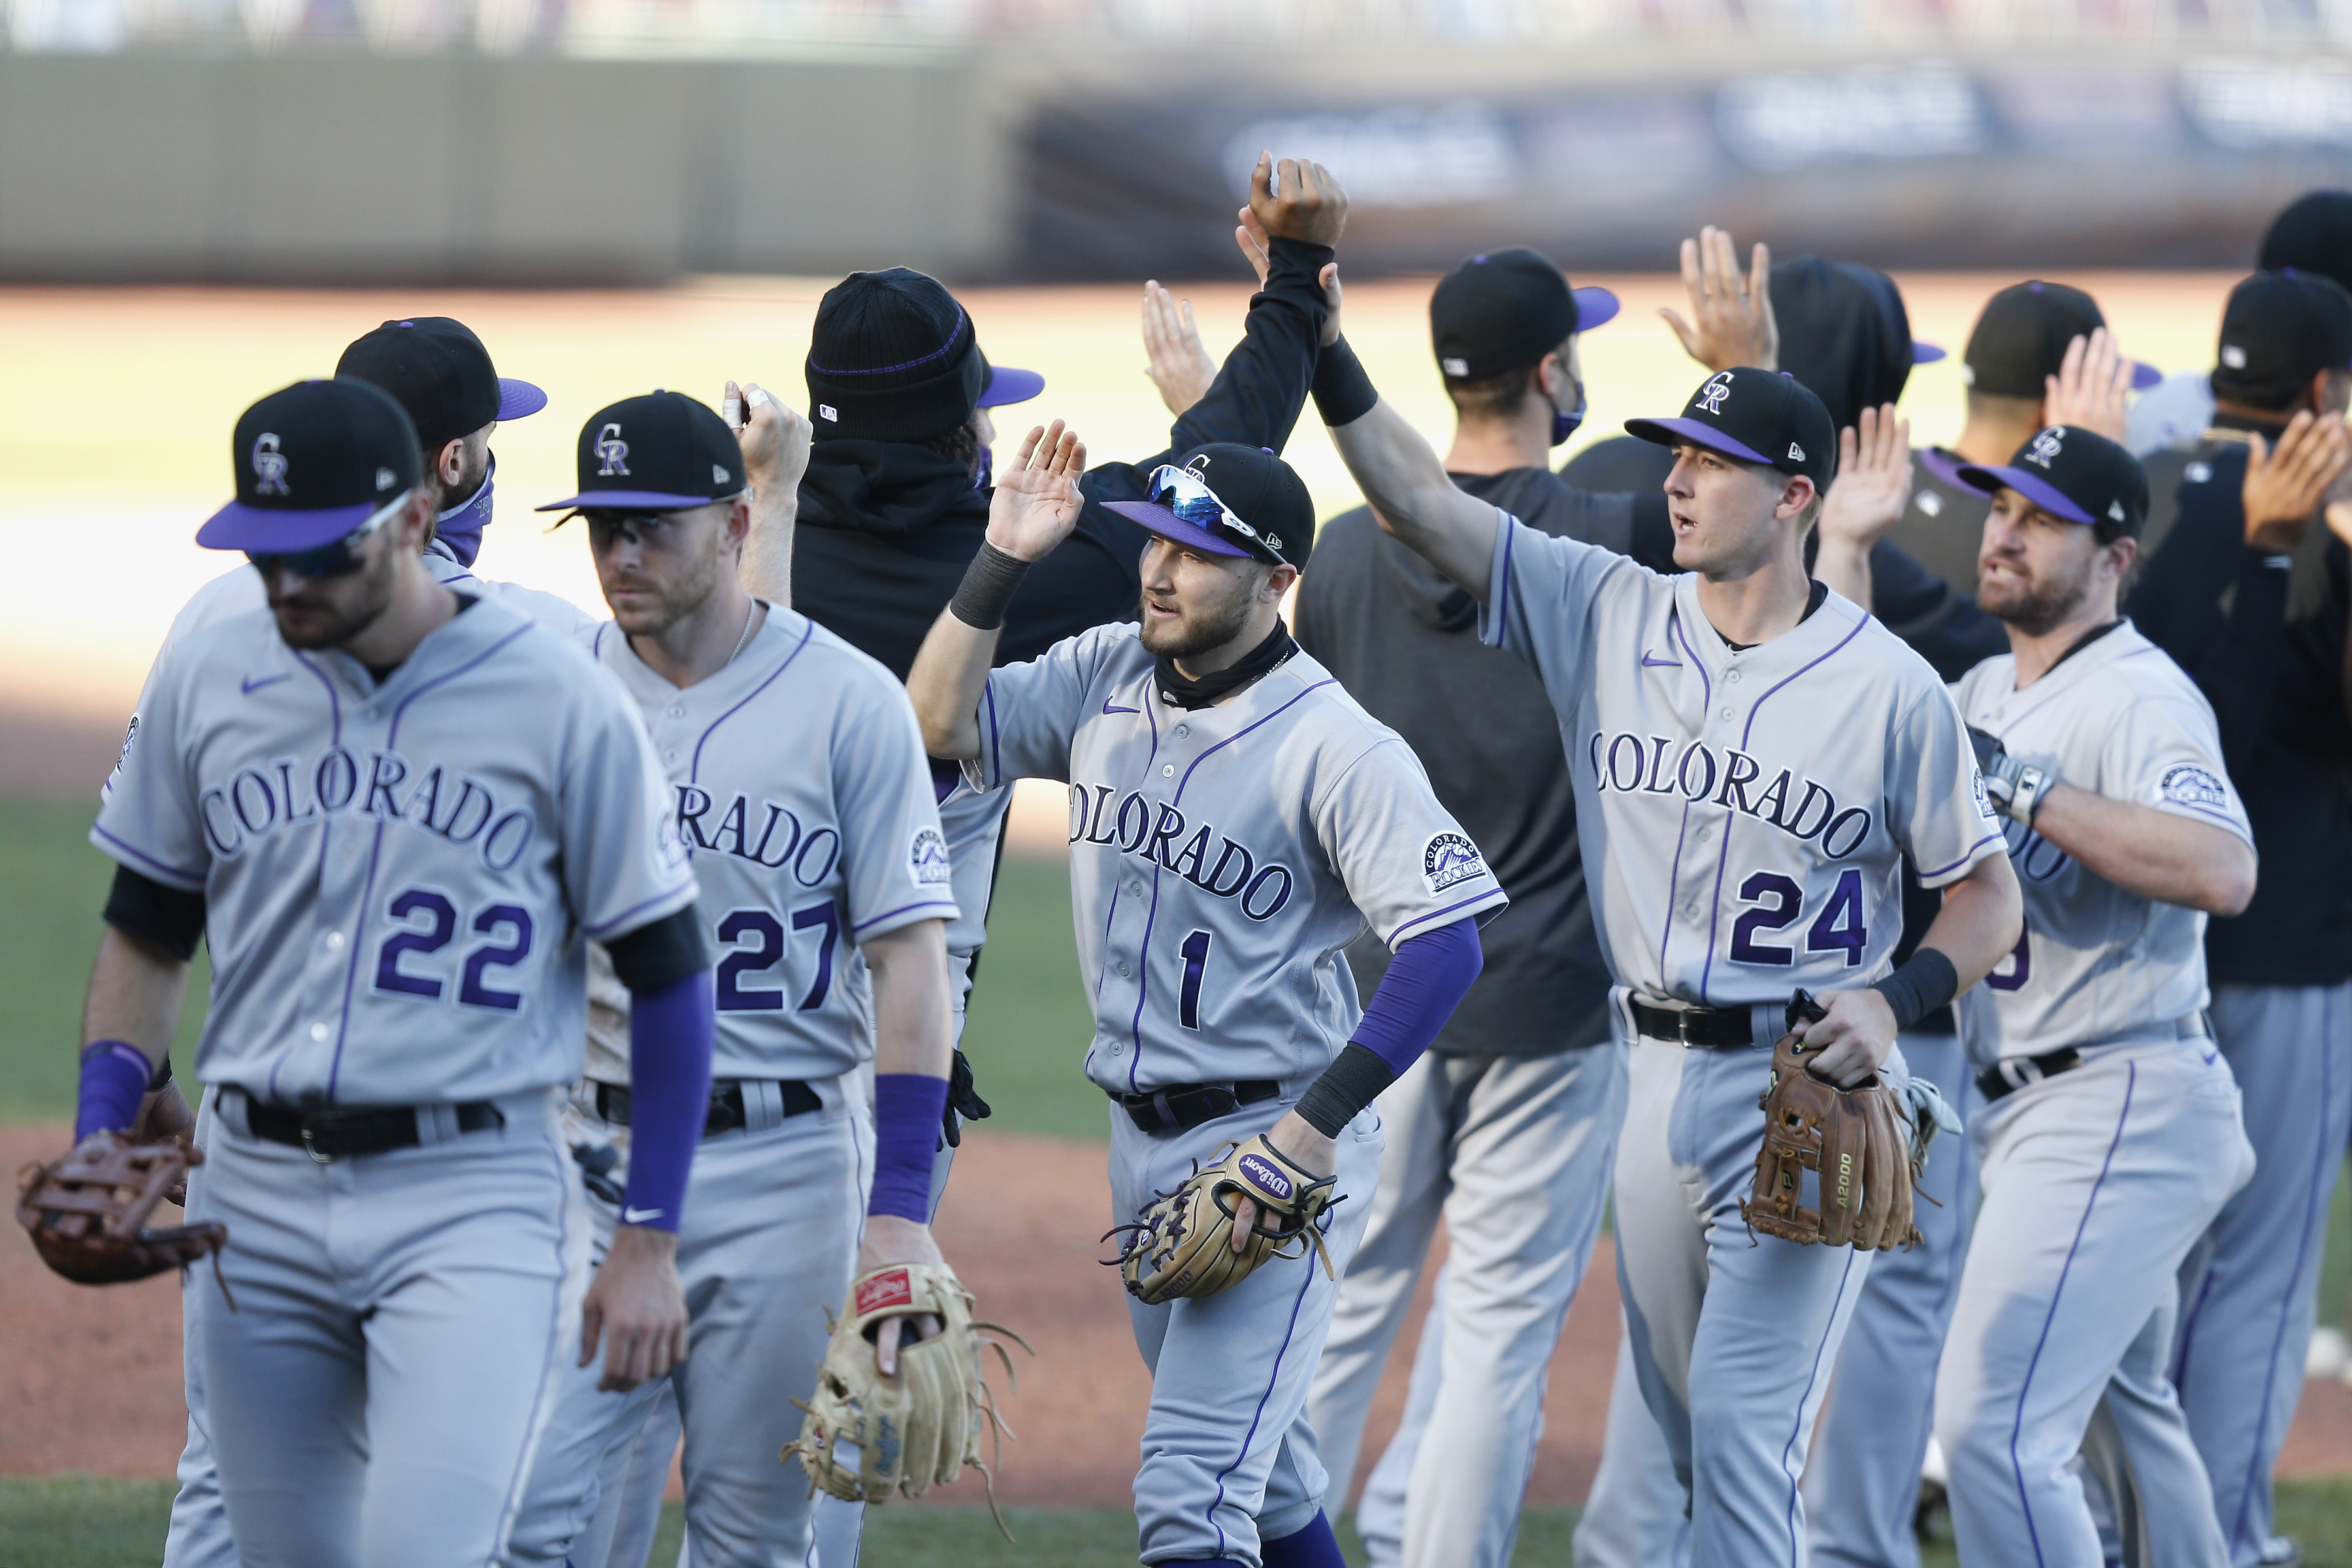 Colorado Rockies players celebrate after their win against the San Francisco Giants